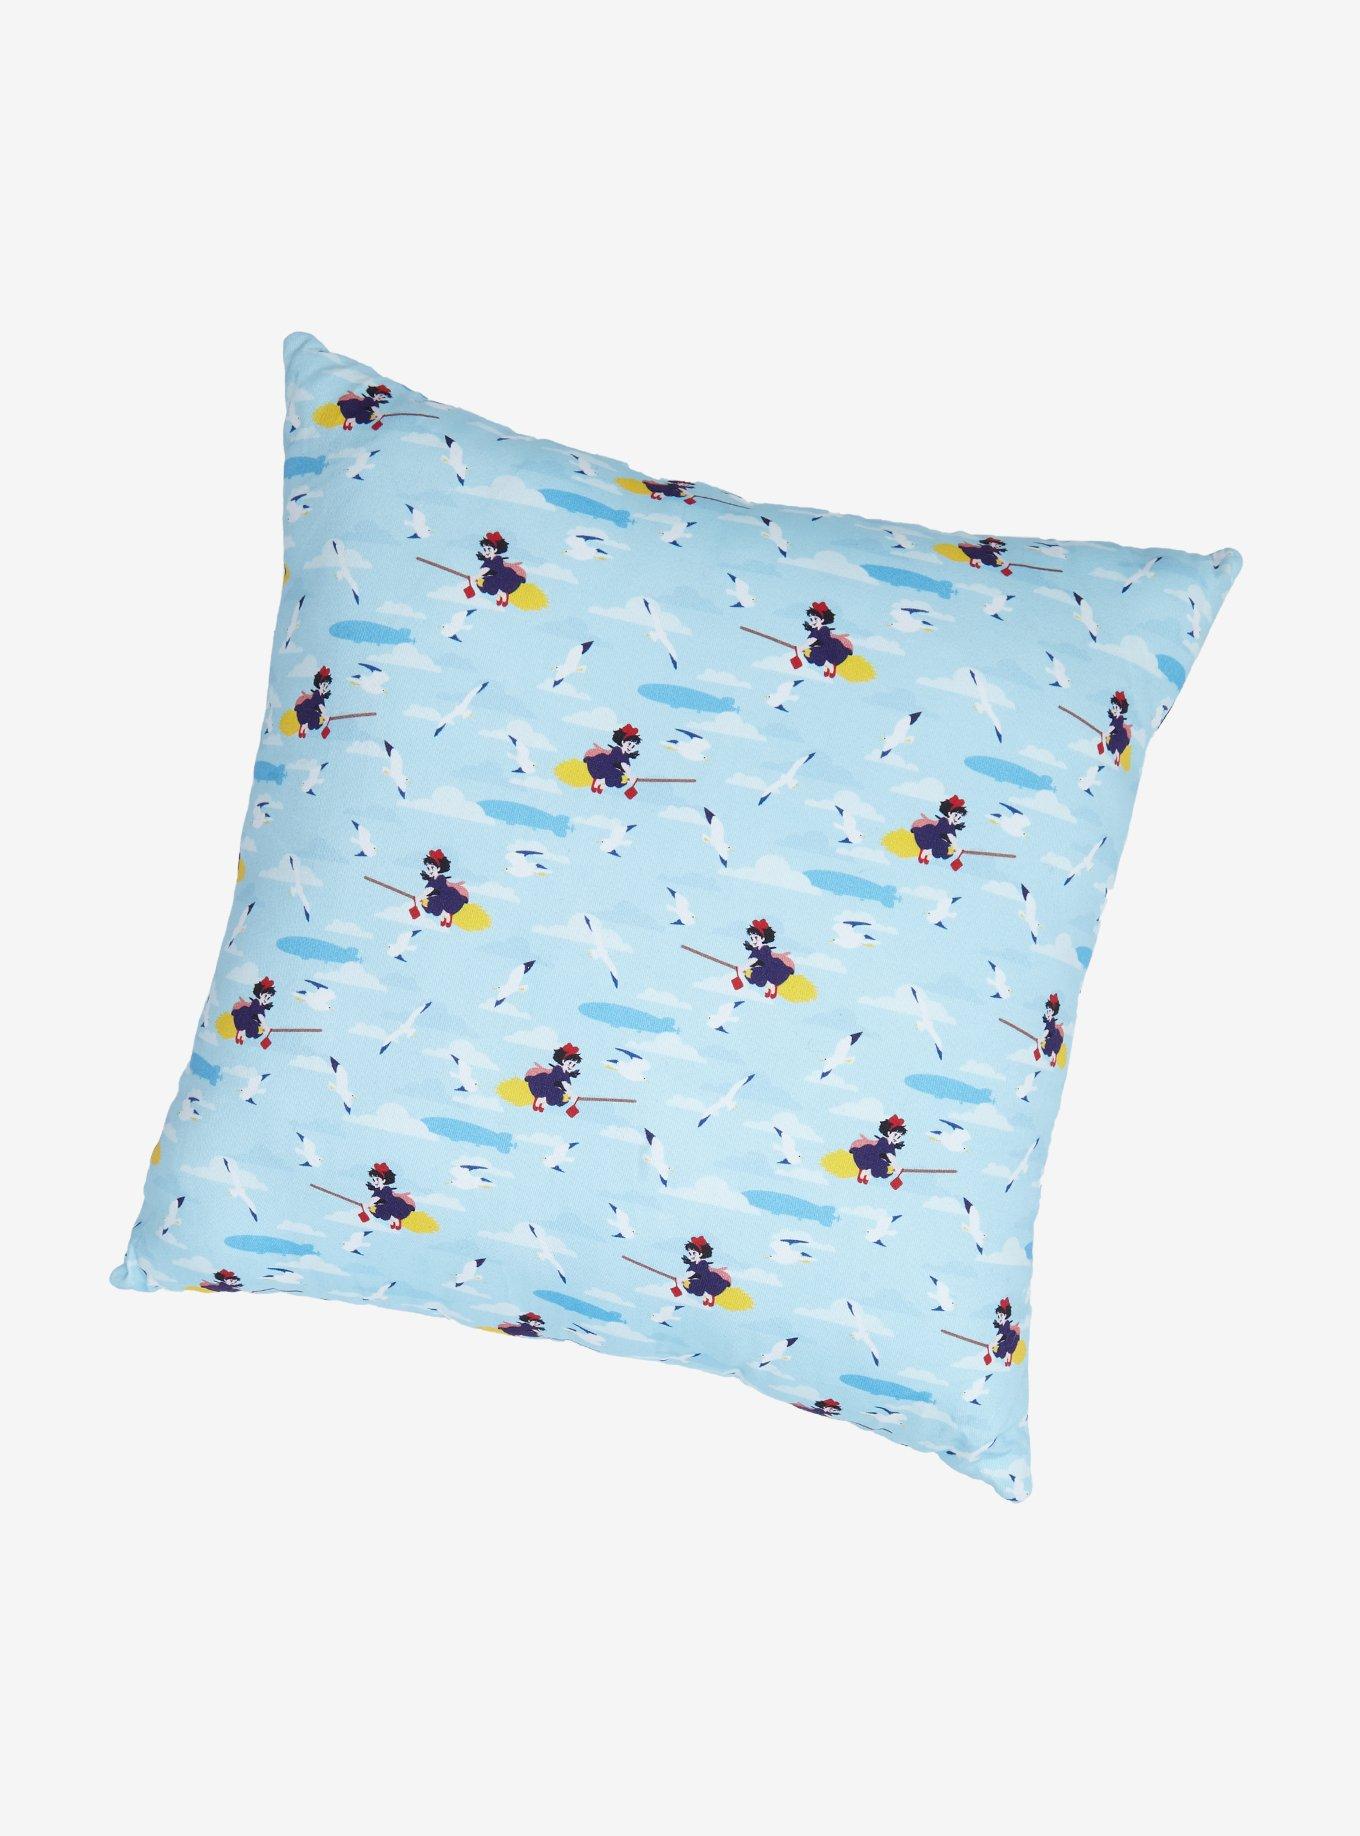 Our Universe Studio Ghibli Kiki's Delivery Service Flying Throw Pillow - BoxLunch Exclusive, , hi-res